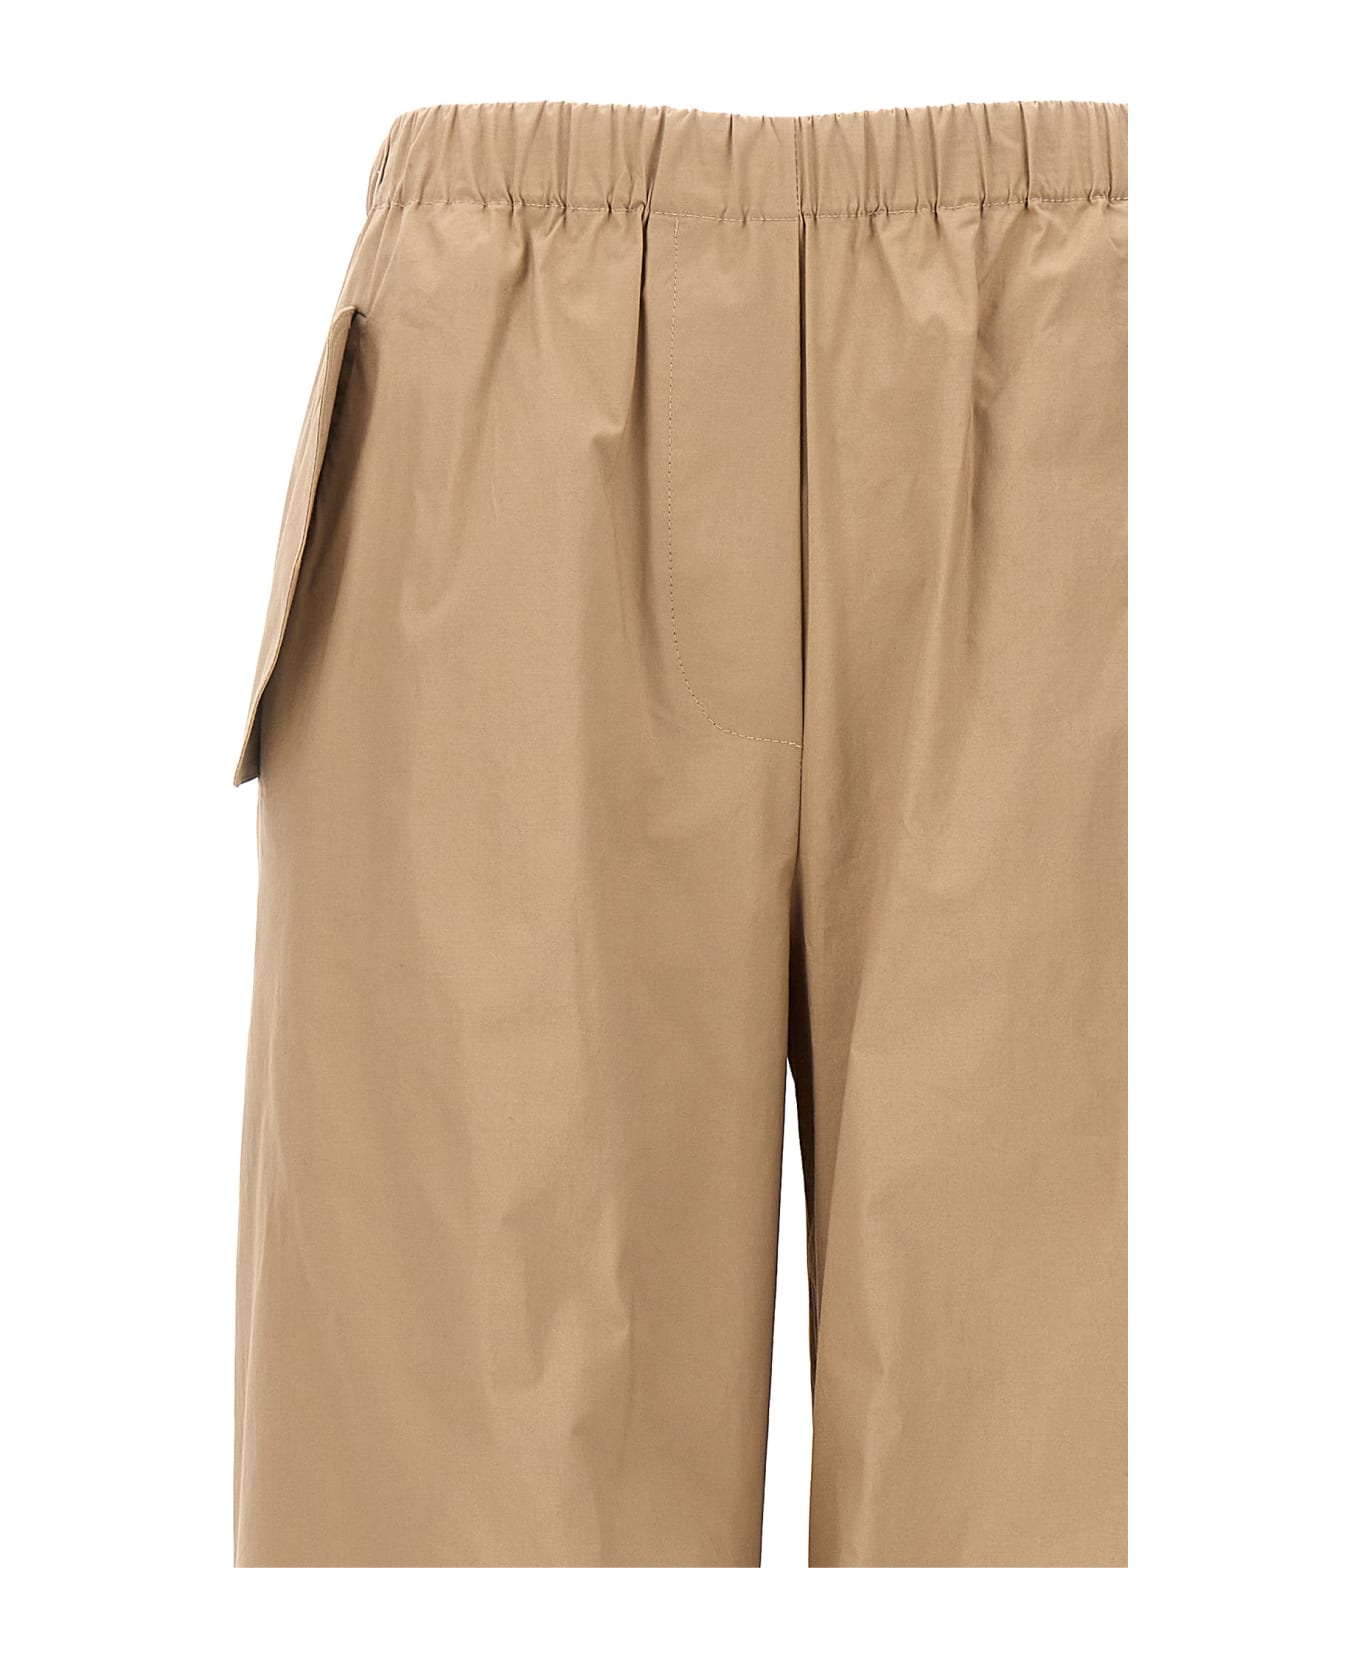 (nude) Cargo Trousers - Beige ボトムス